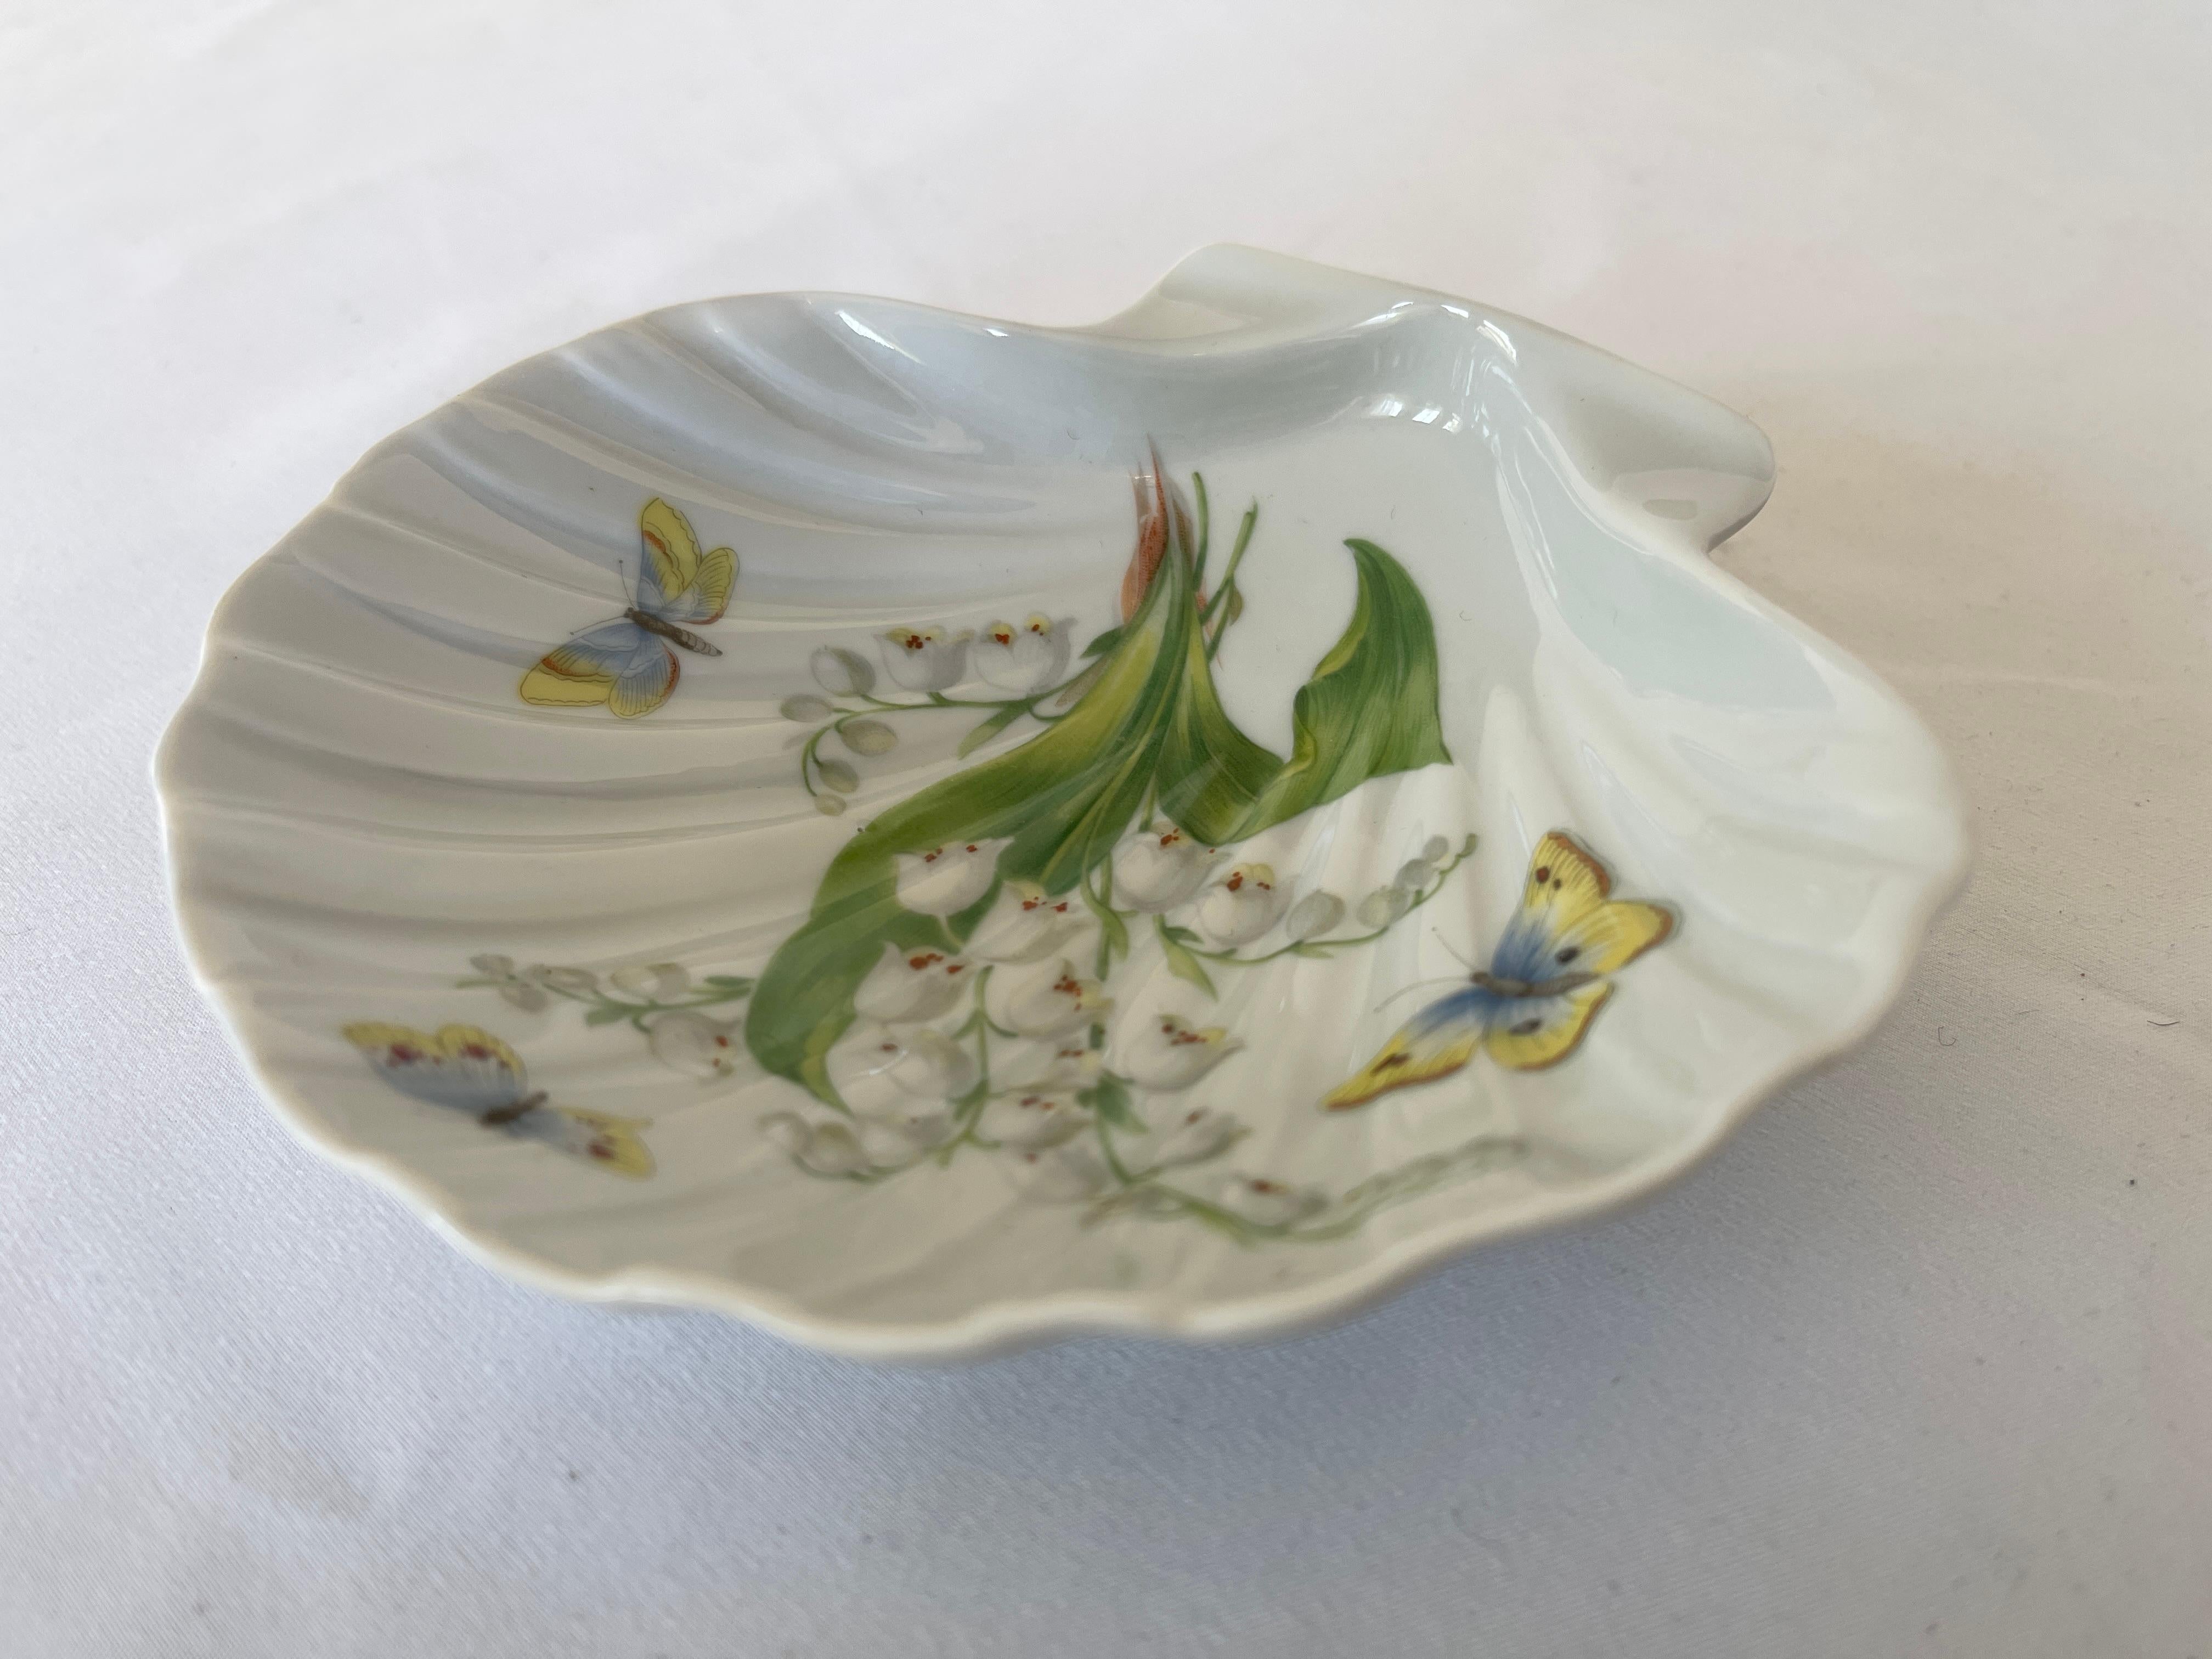 International Style Limoges French Porcelain Sea Shell Dish W/ Hand Painted Lily-of-The-Valley Motif For Sale